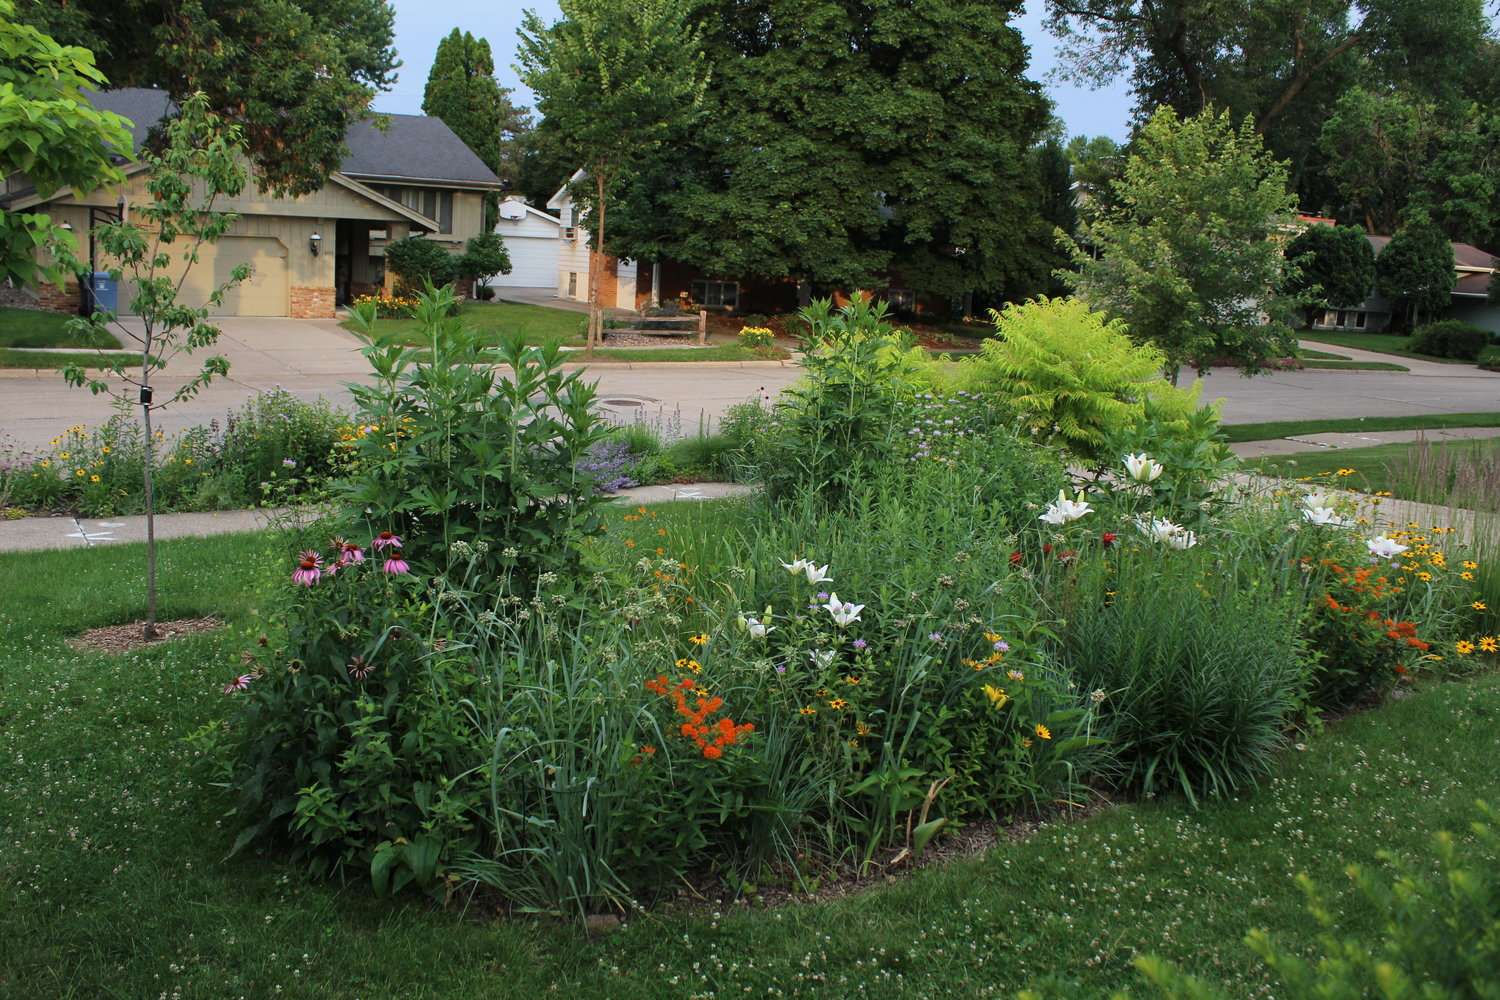 Rain gardens help hold water on site. They're a beautiful way to keep water clean.